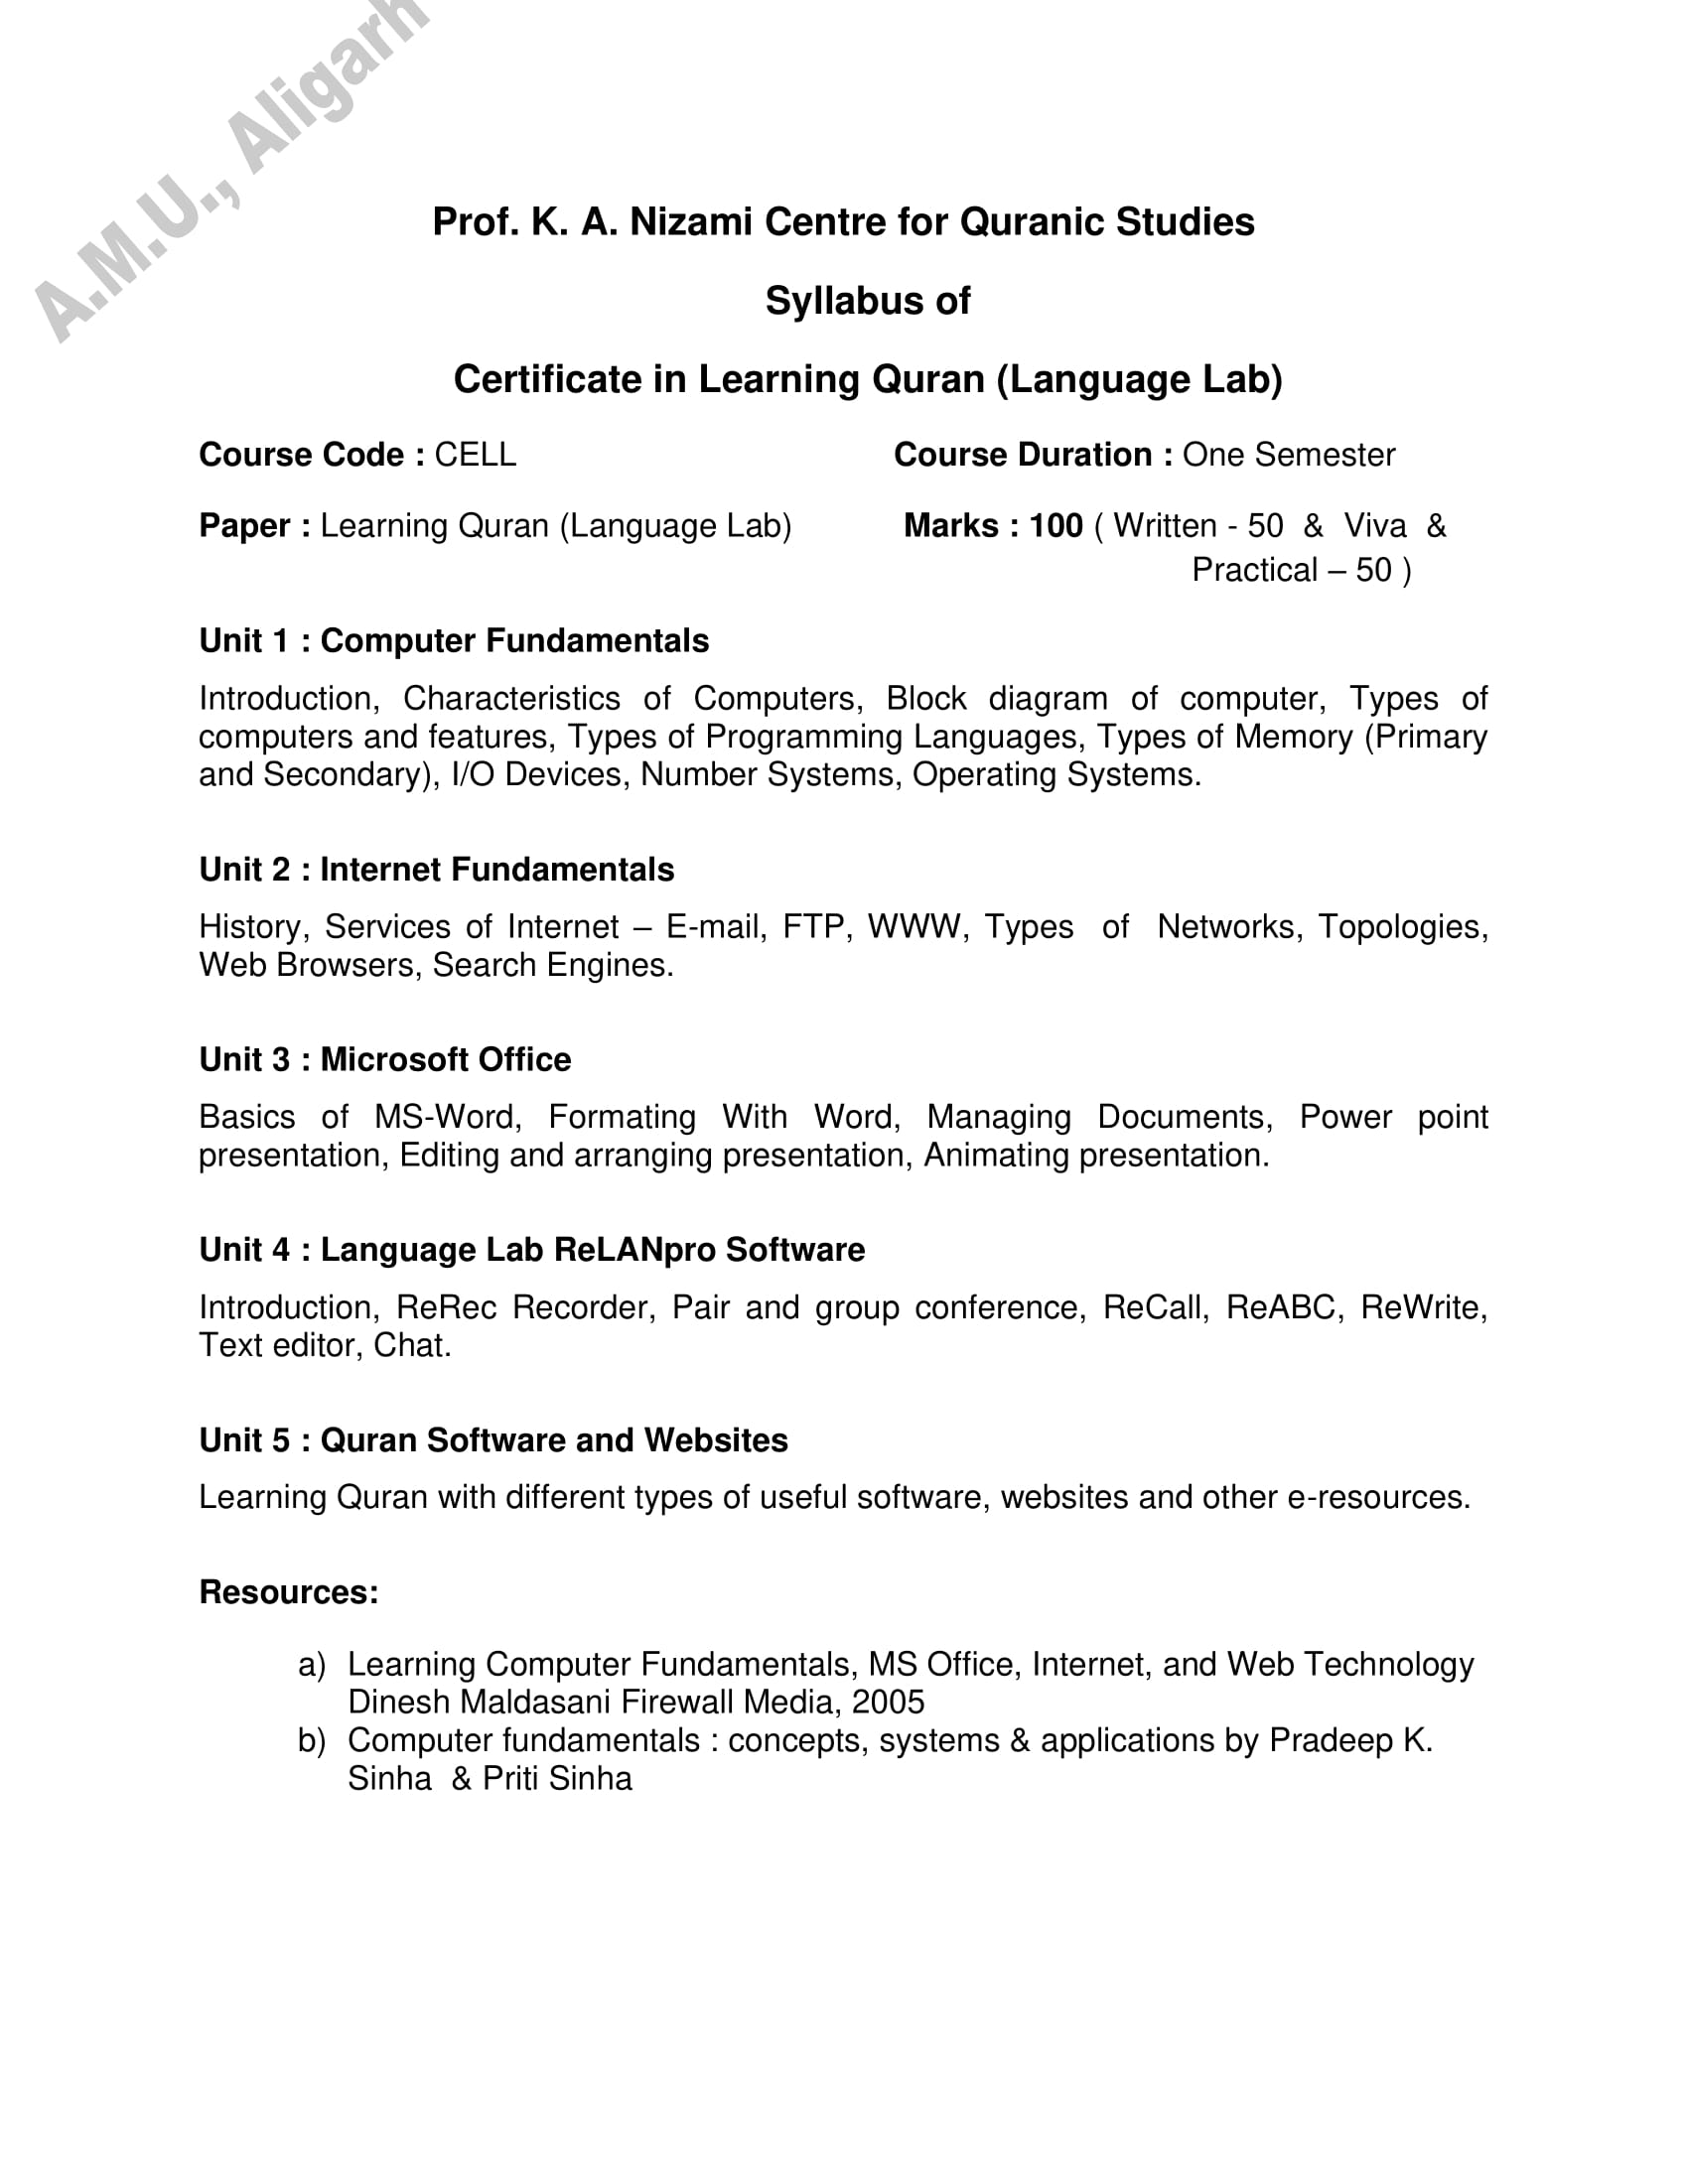 AMU Entrance Exam Syllabus for Certificate in Learning Quran (Language Lab) - Page 1